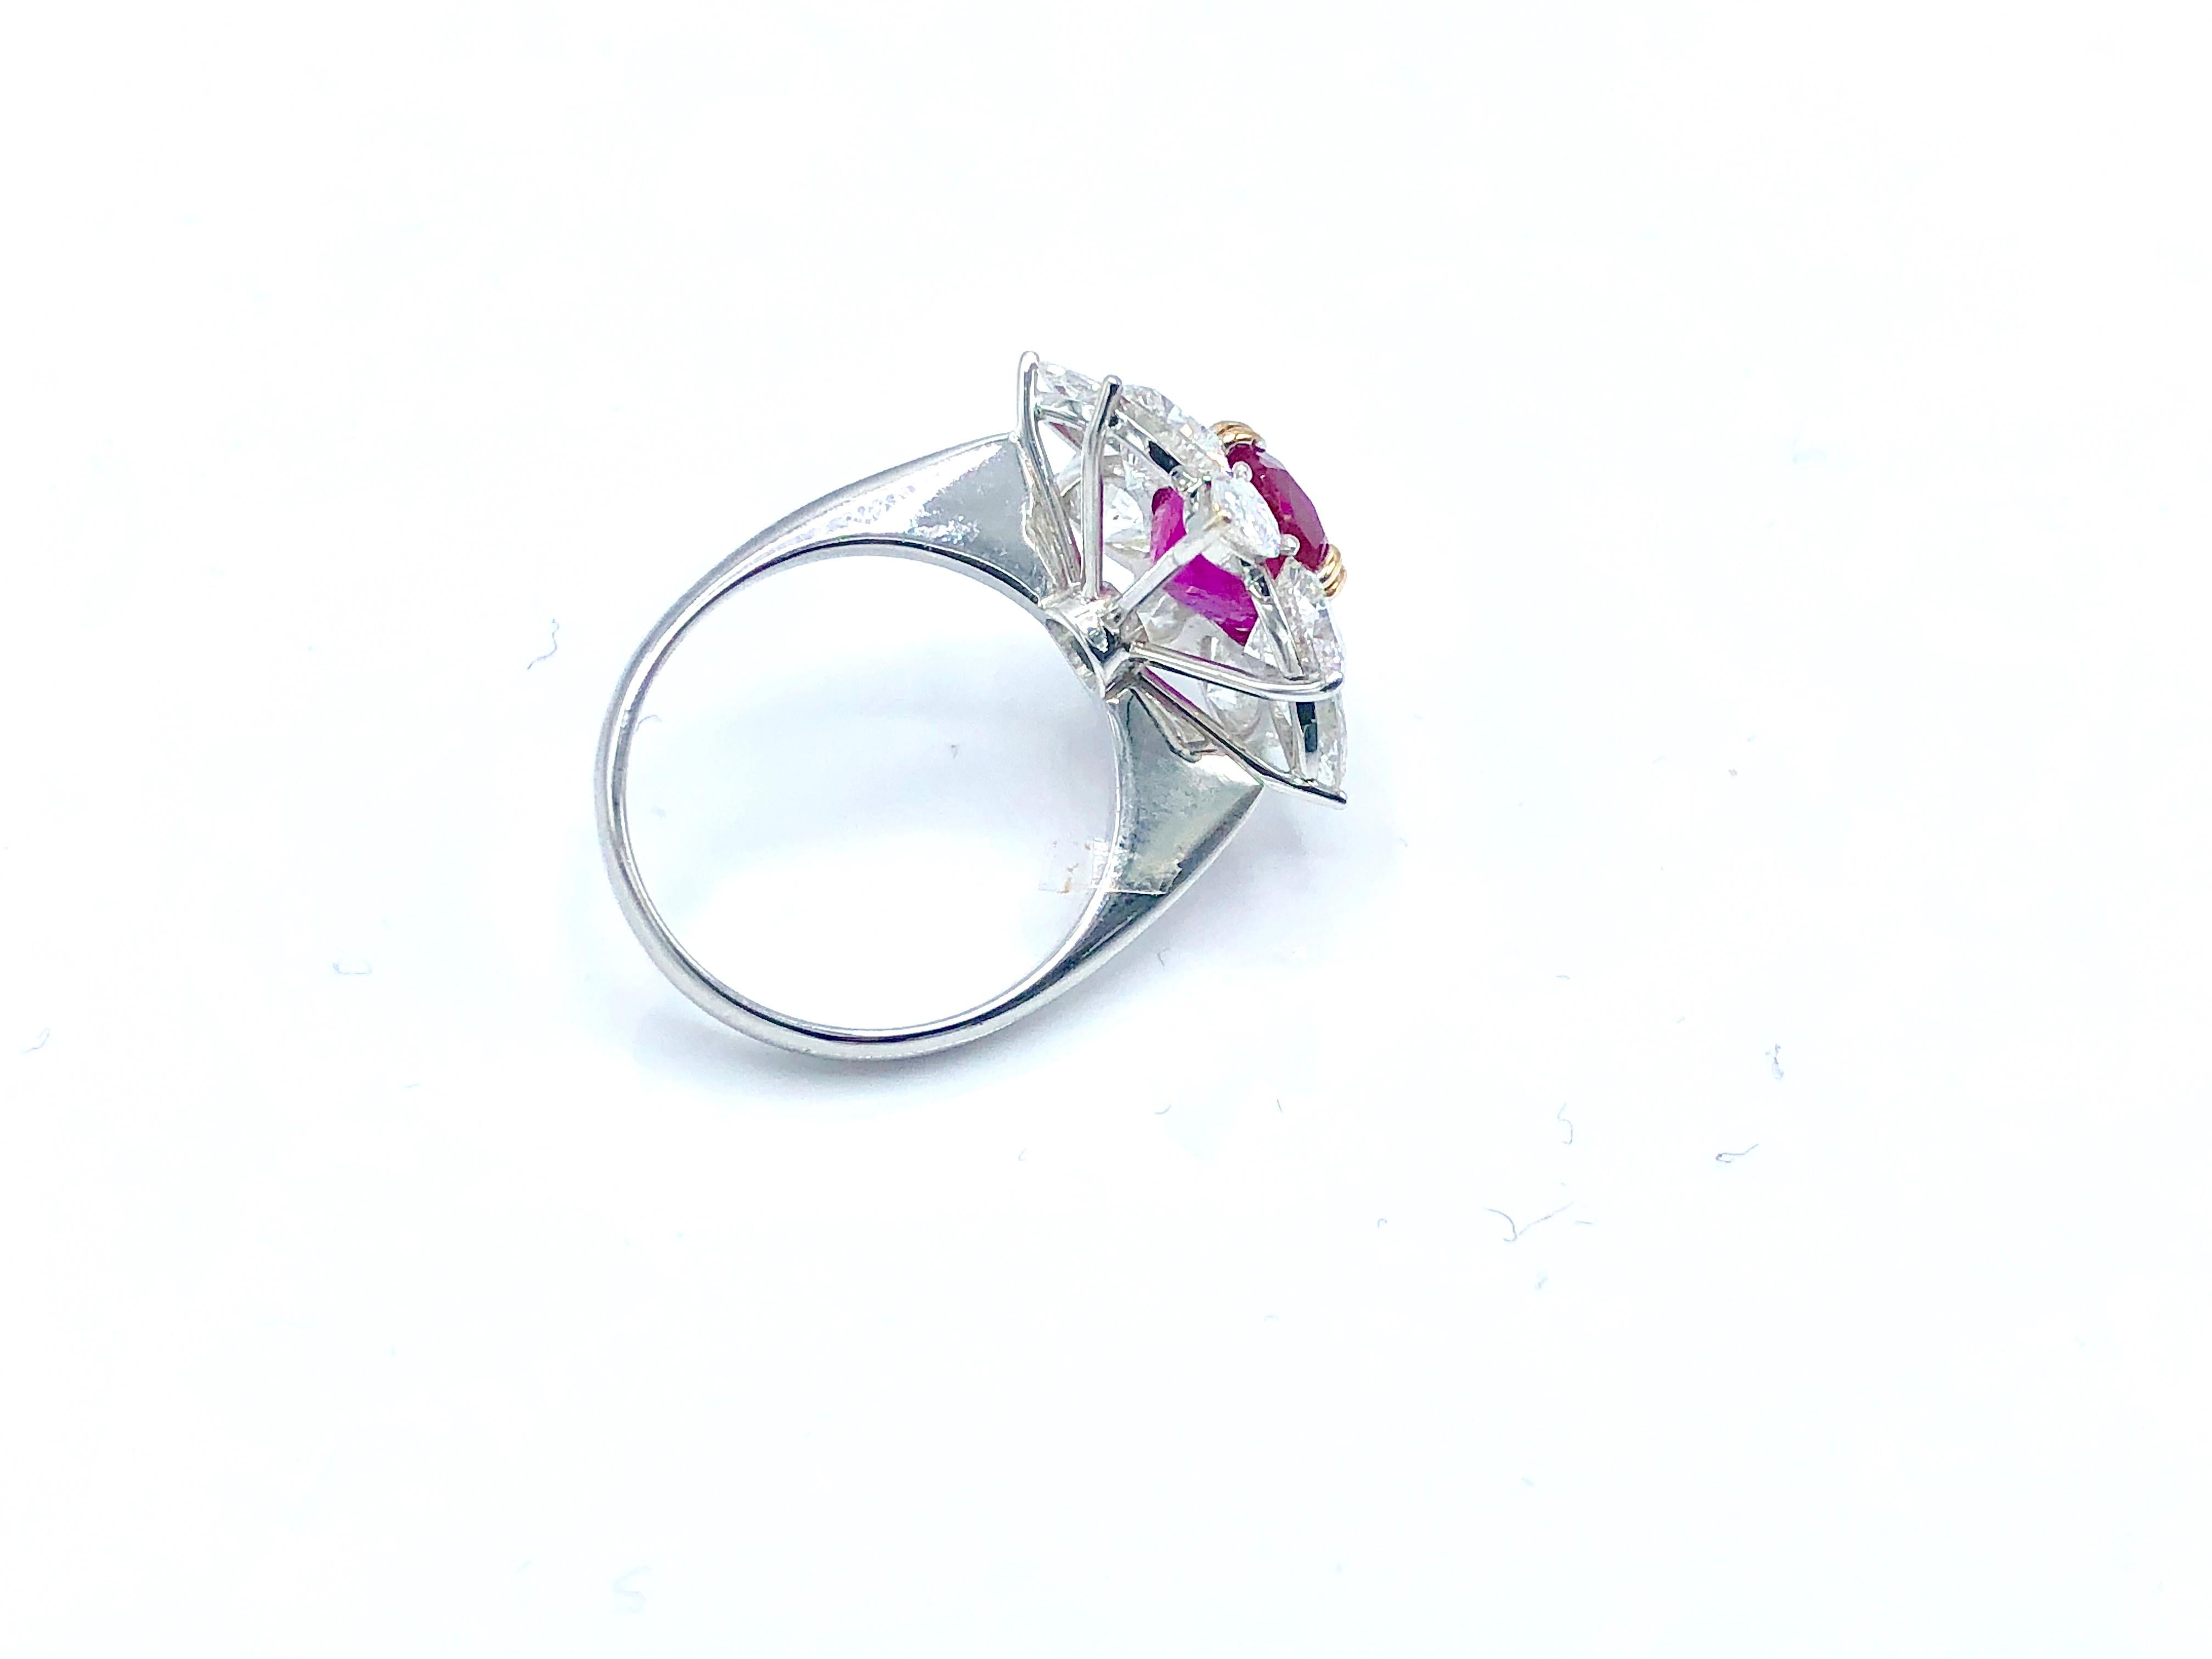 A timeless ring set with a rare 3.38 ct Burmese unheated ruby surrounded by fancy cut diamonds (3.08 ct)

Size : US 6, IT 12, FR 54